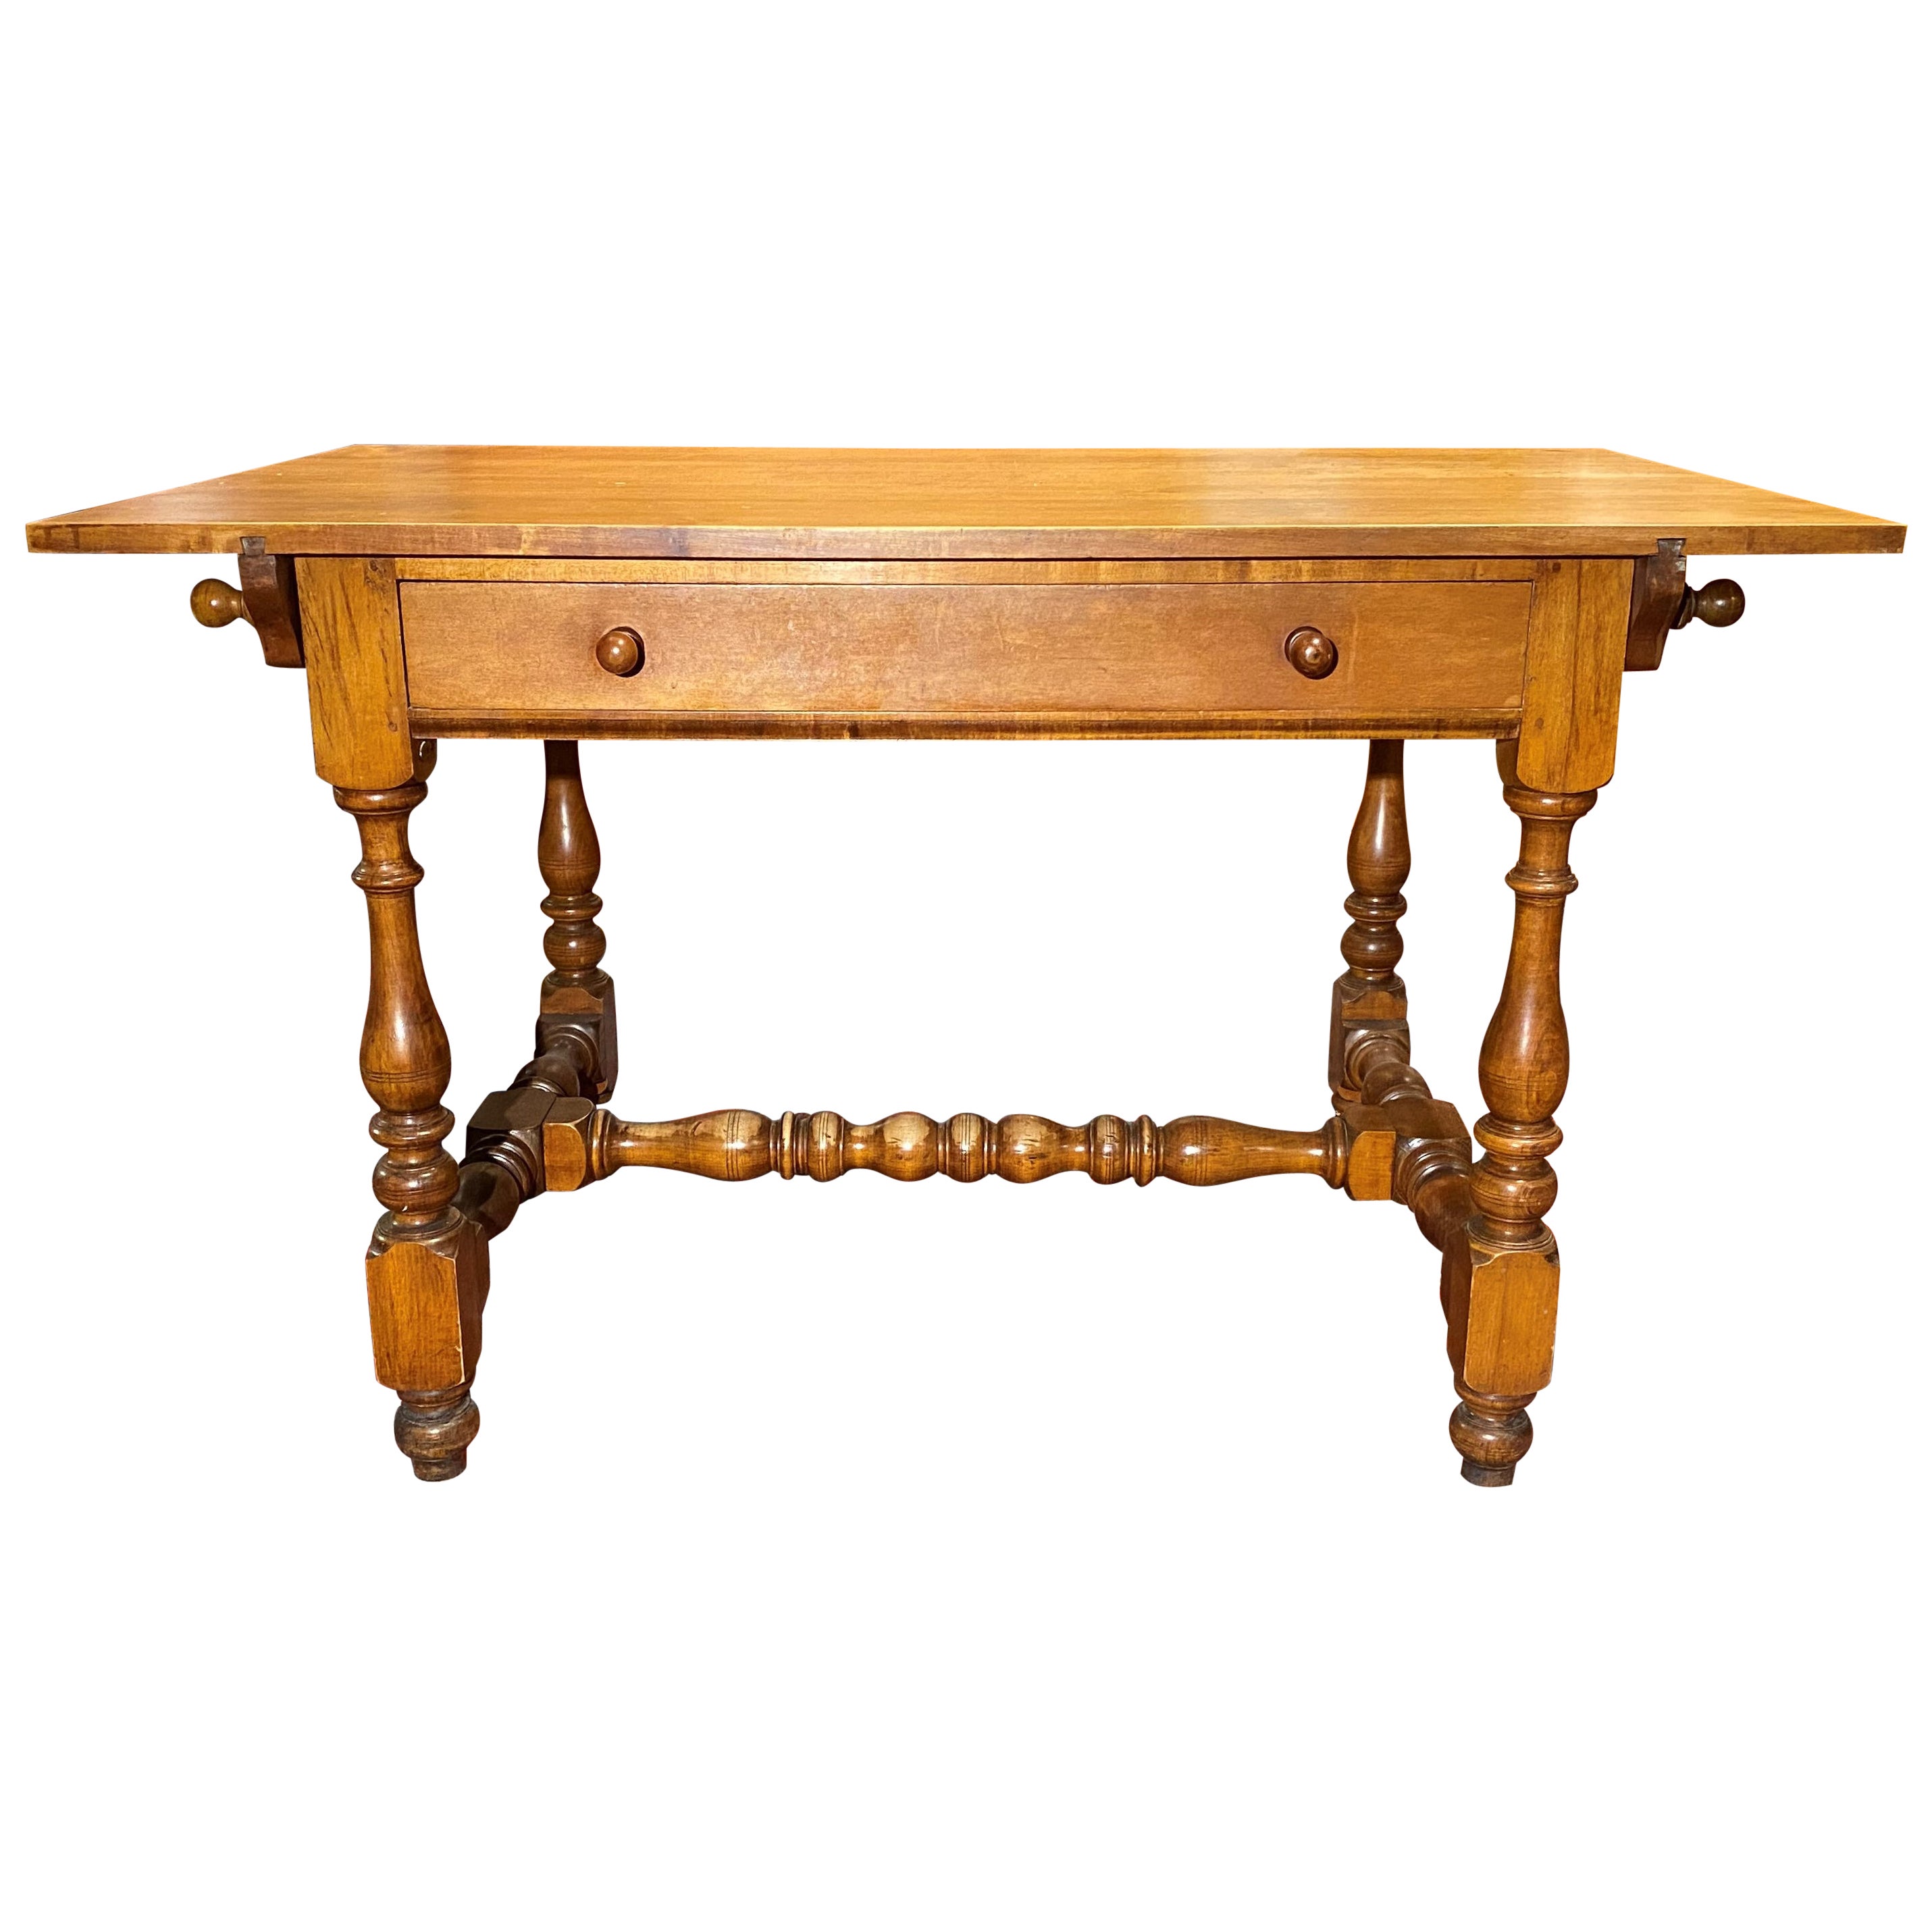 Wallace Nutting Signed Maple Tavern Table with Bold Turned Legs & Stretchers